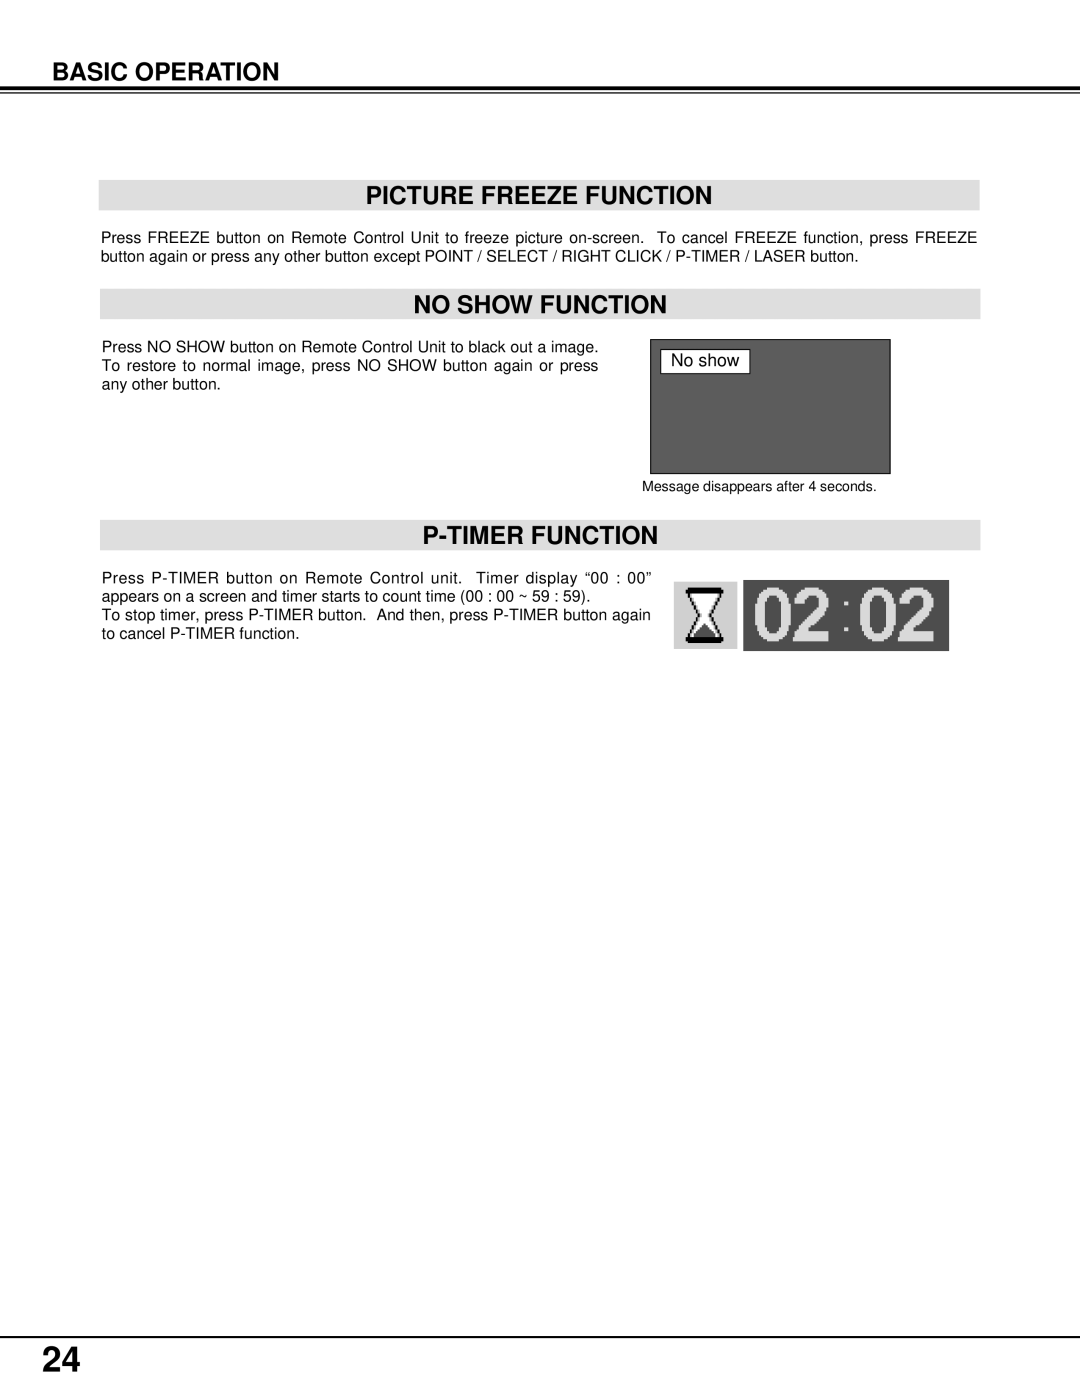 Eiki LC-XT2 instruction manual Basic Operation Picture Freeze Function, No Show Function, P-Timerfunction, No show 